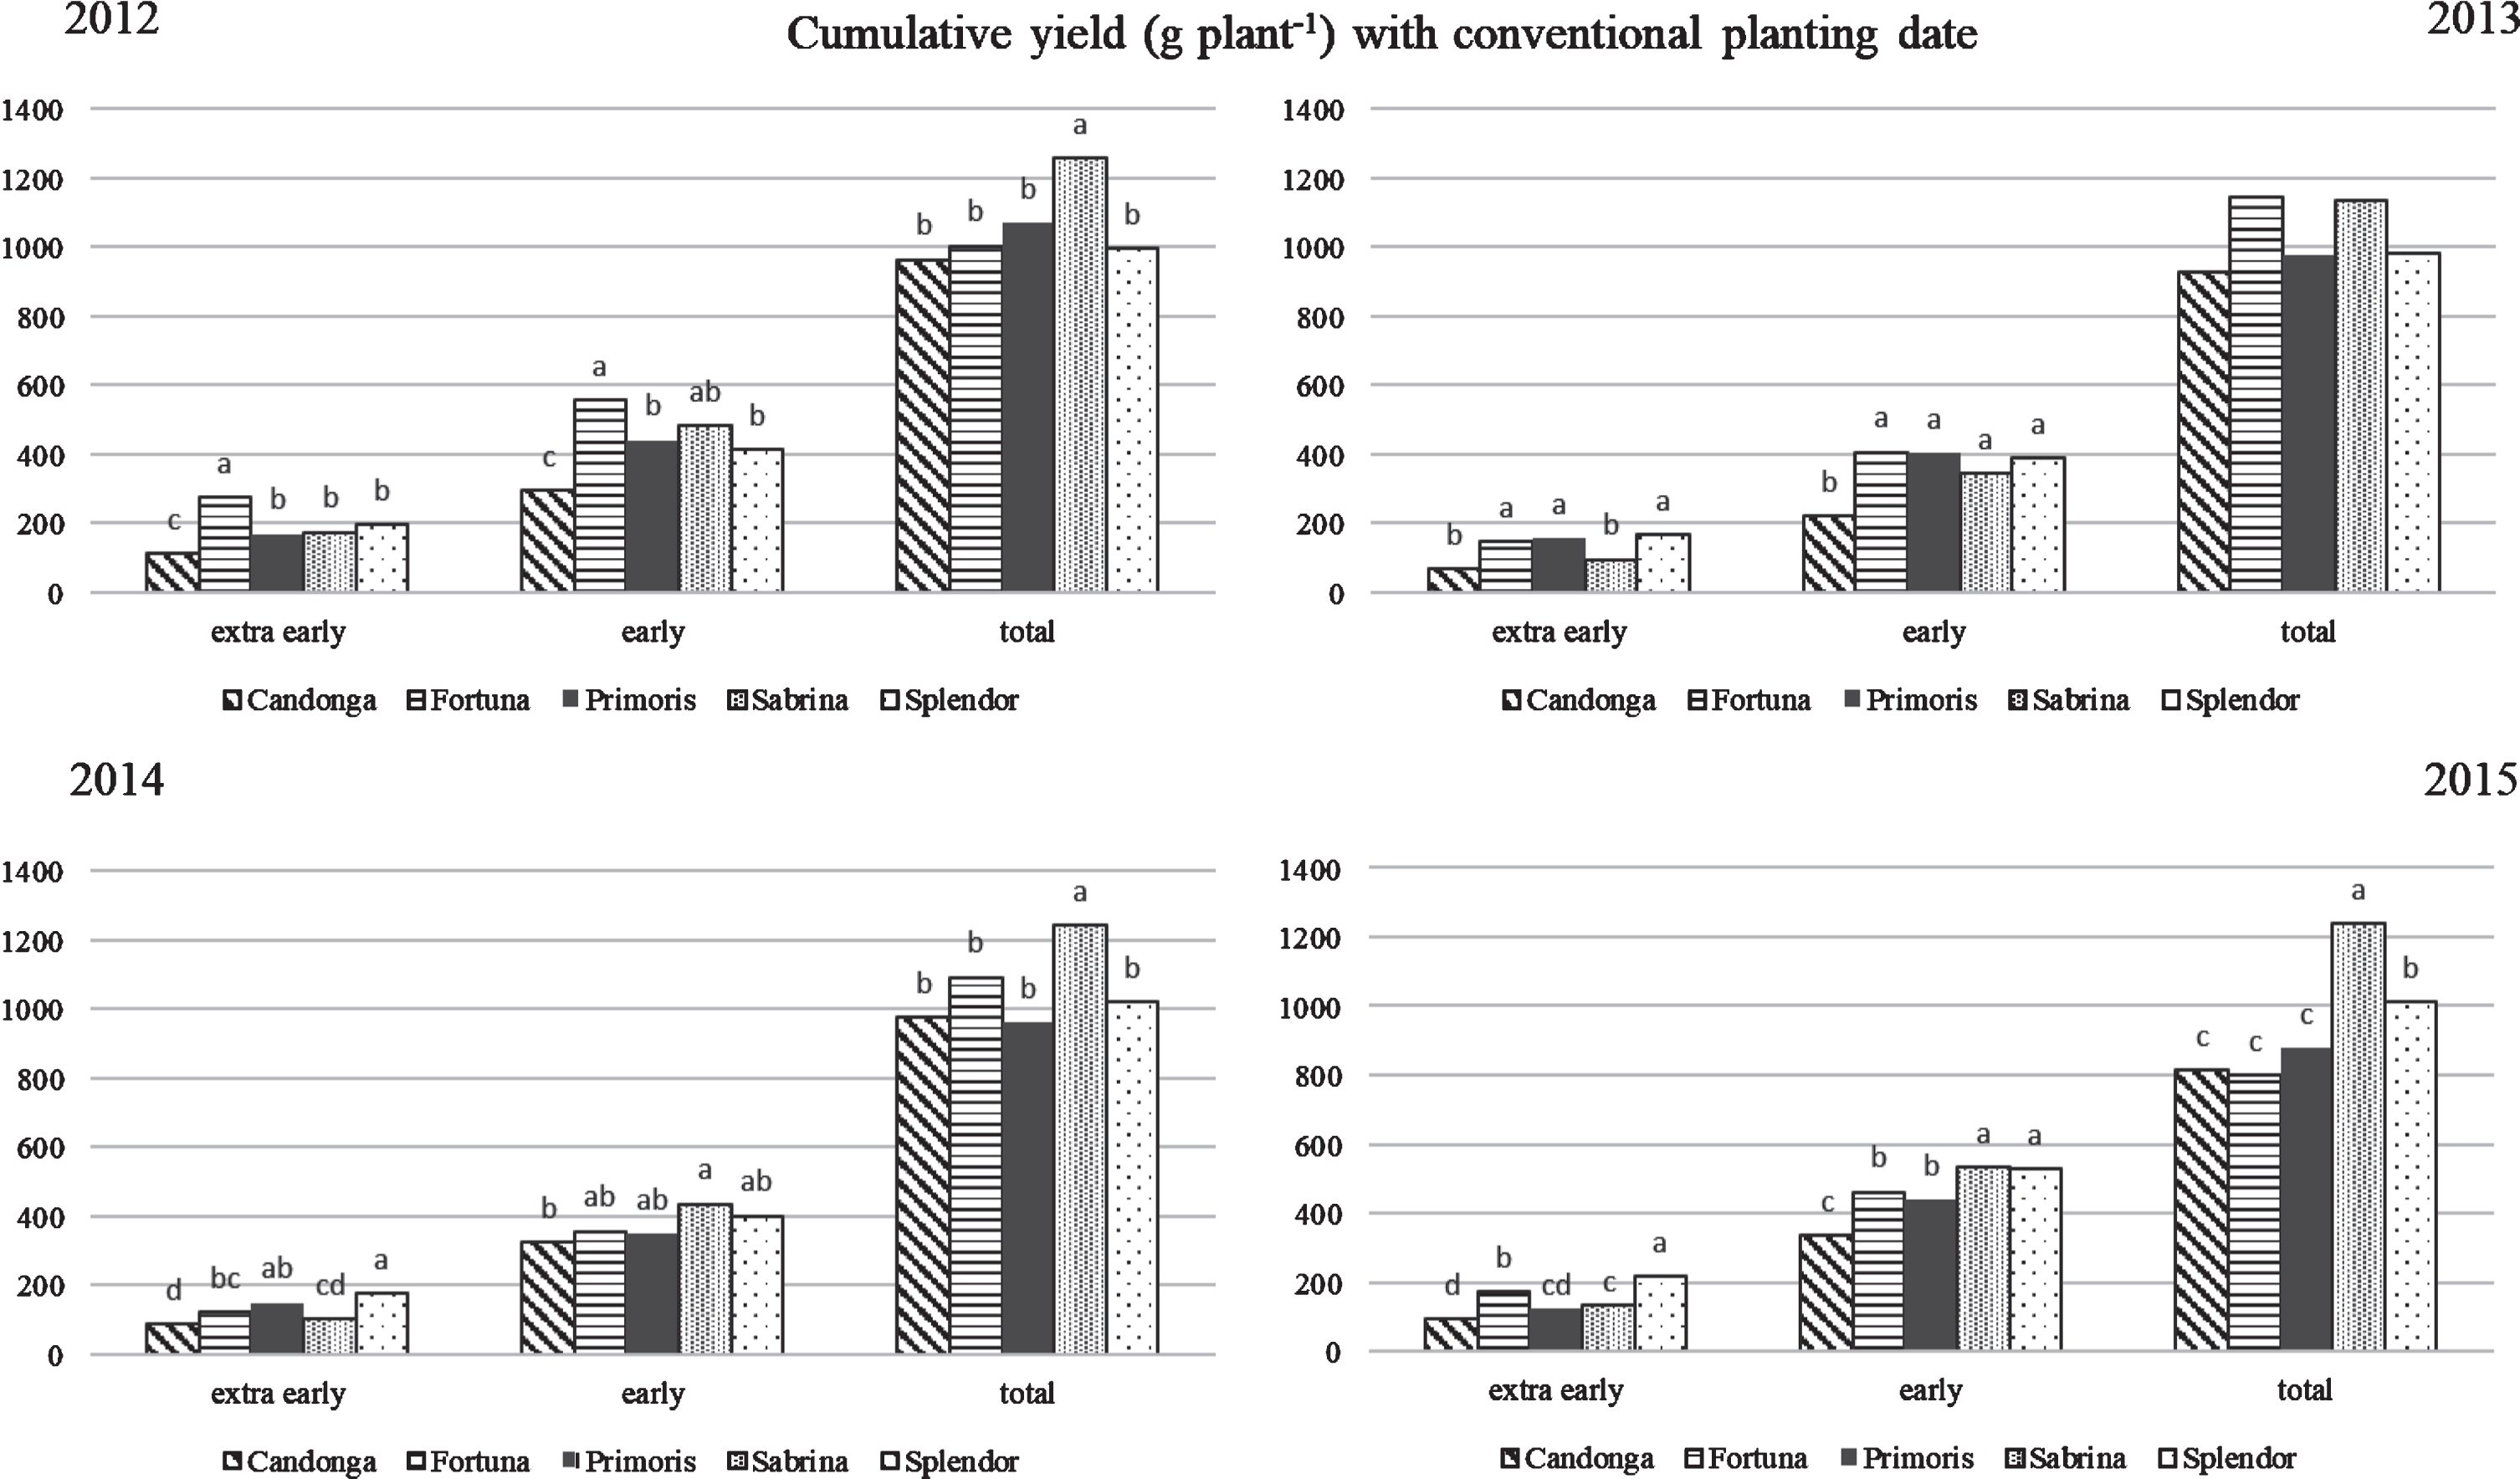 Cumulative yield (g plant–1) of five strawberry cultivars with conventional planting date in the 2012, 2013, 2014 and 2015 crop seasons. Means followed by different letters are significantly different at P < 0.05, as determined by the LSD test.